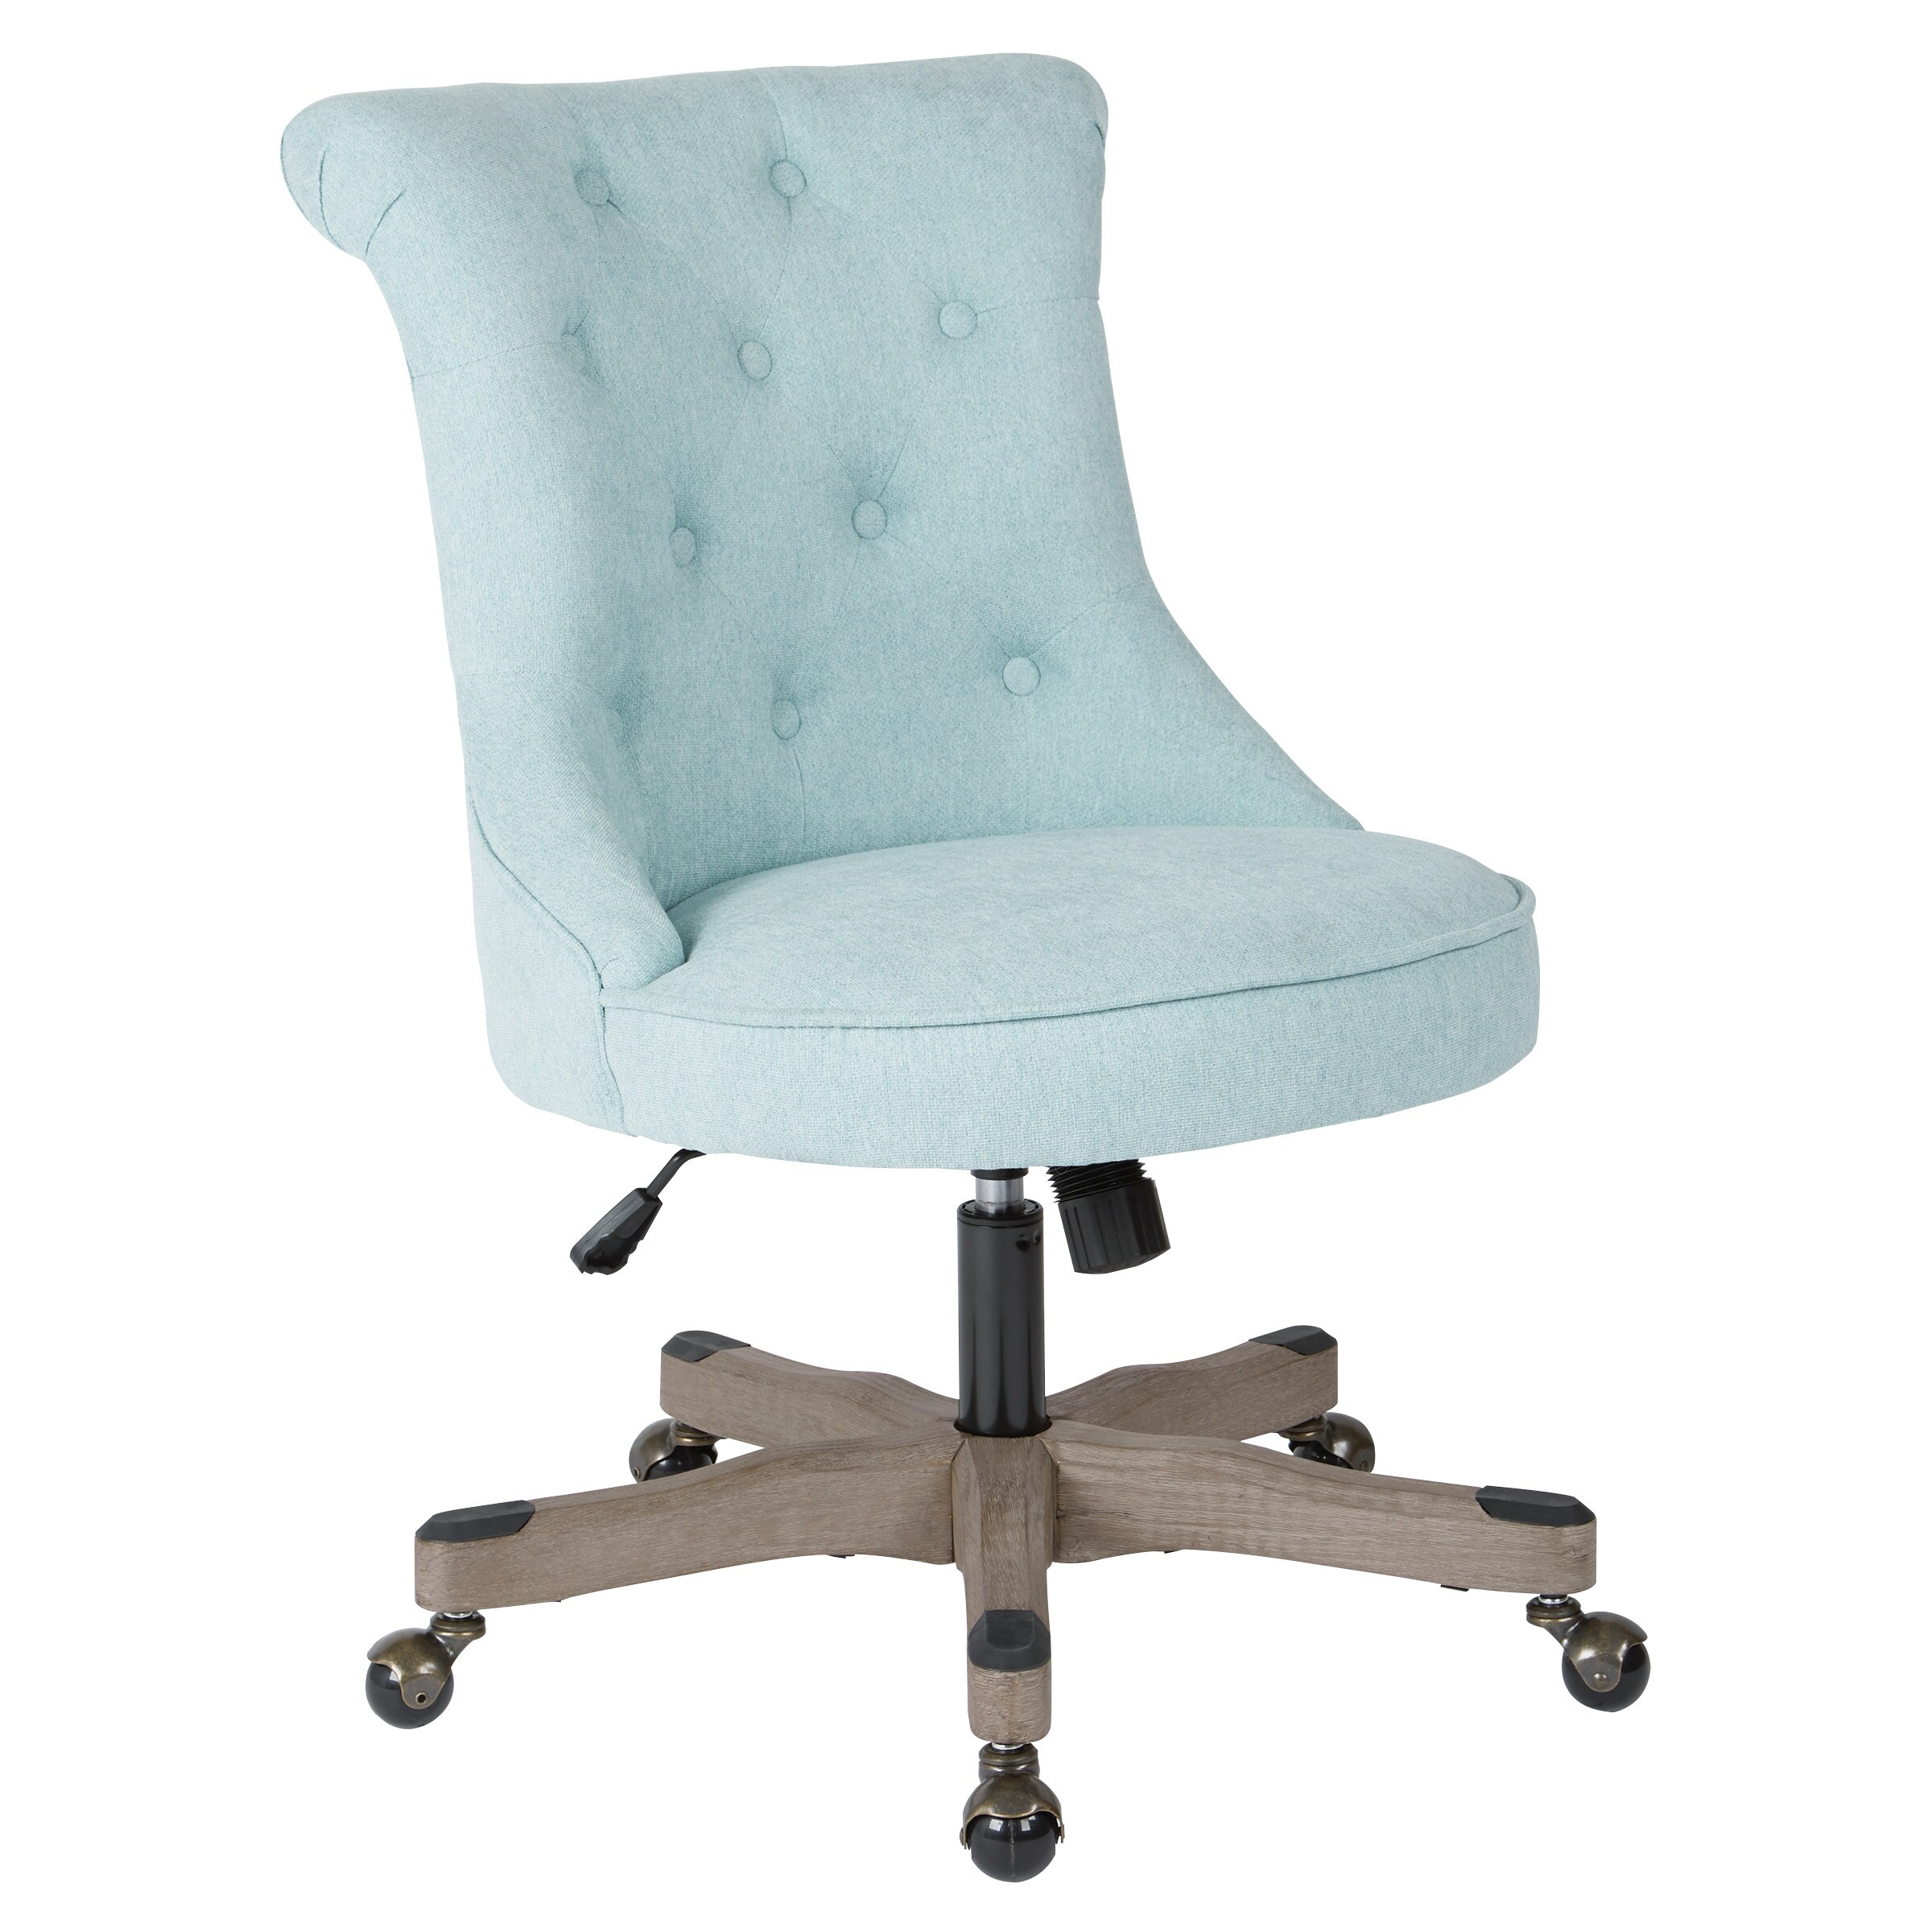 Porch and Den Joliet Tufted Home Office Chair